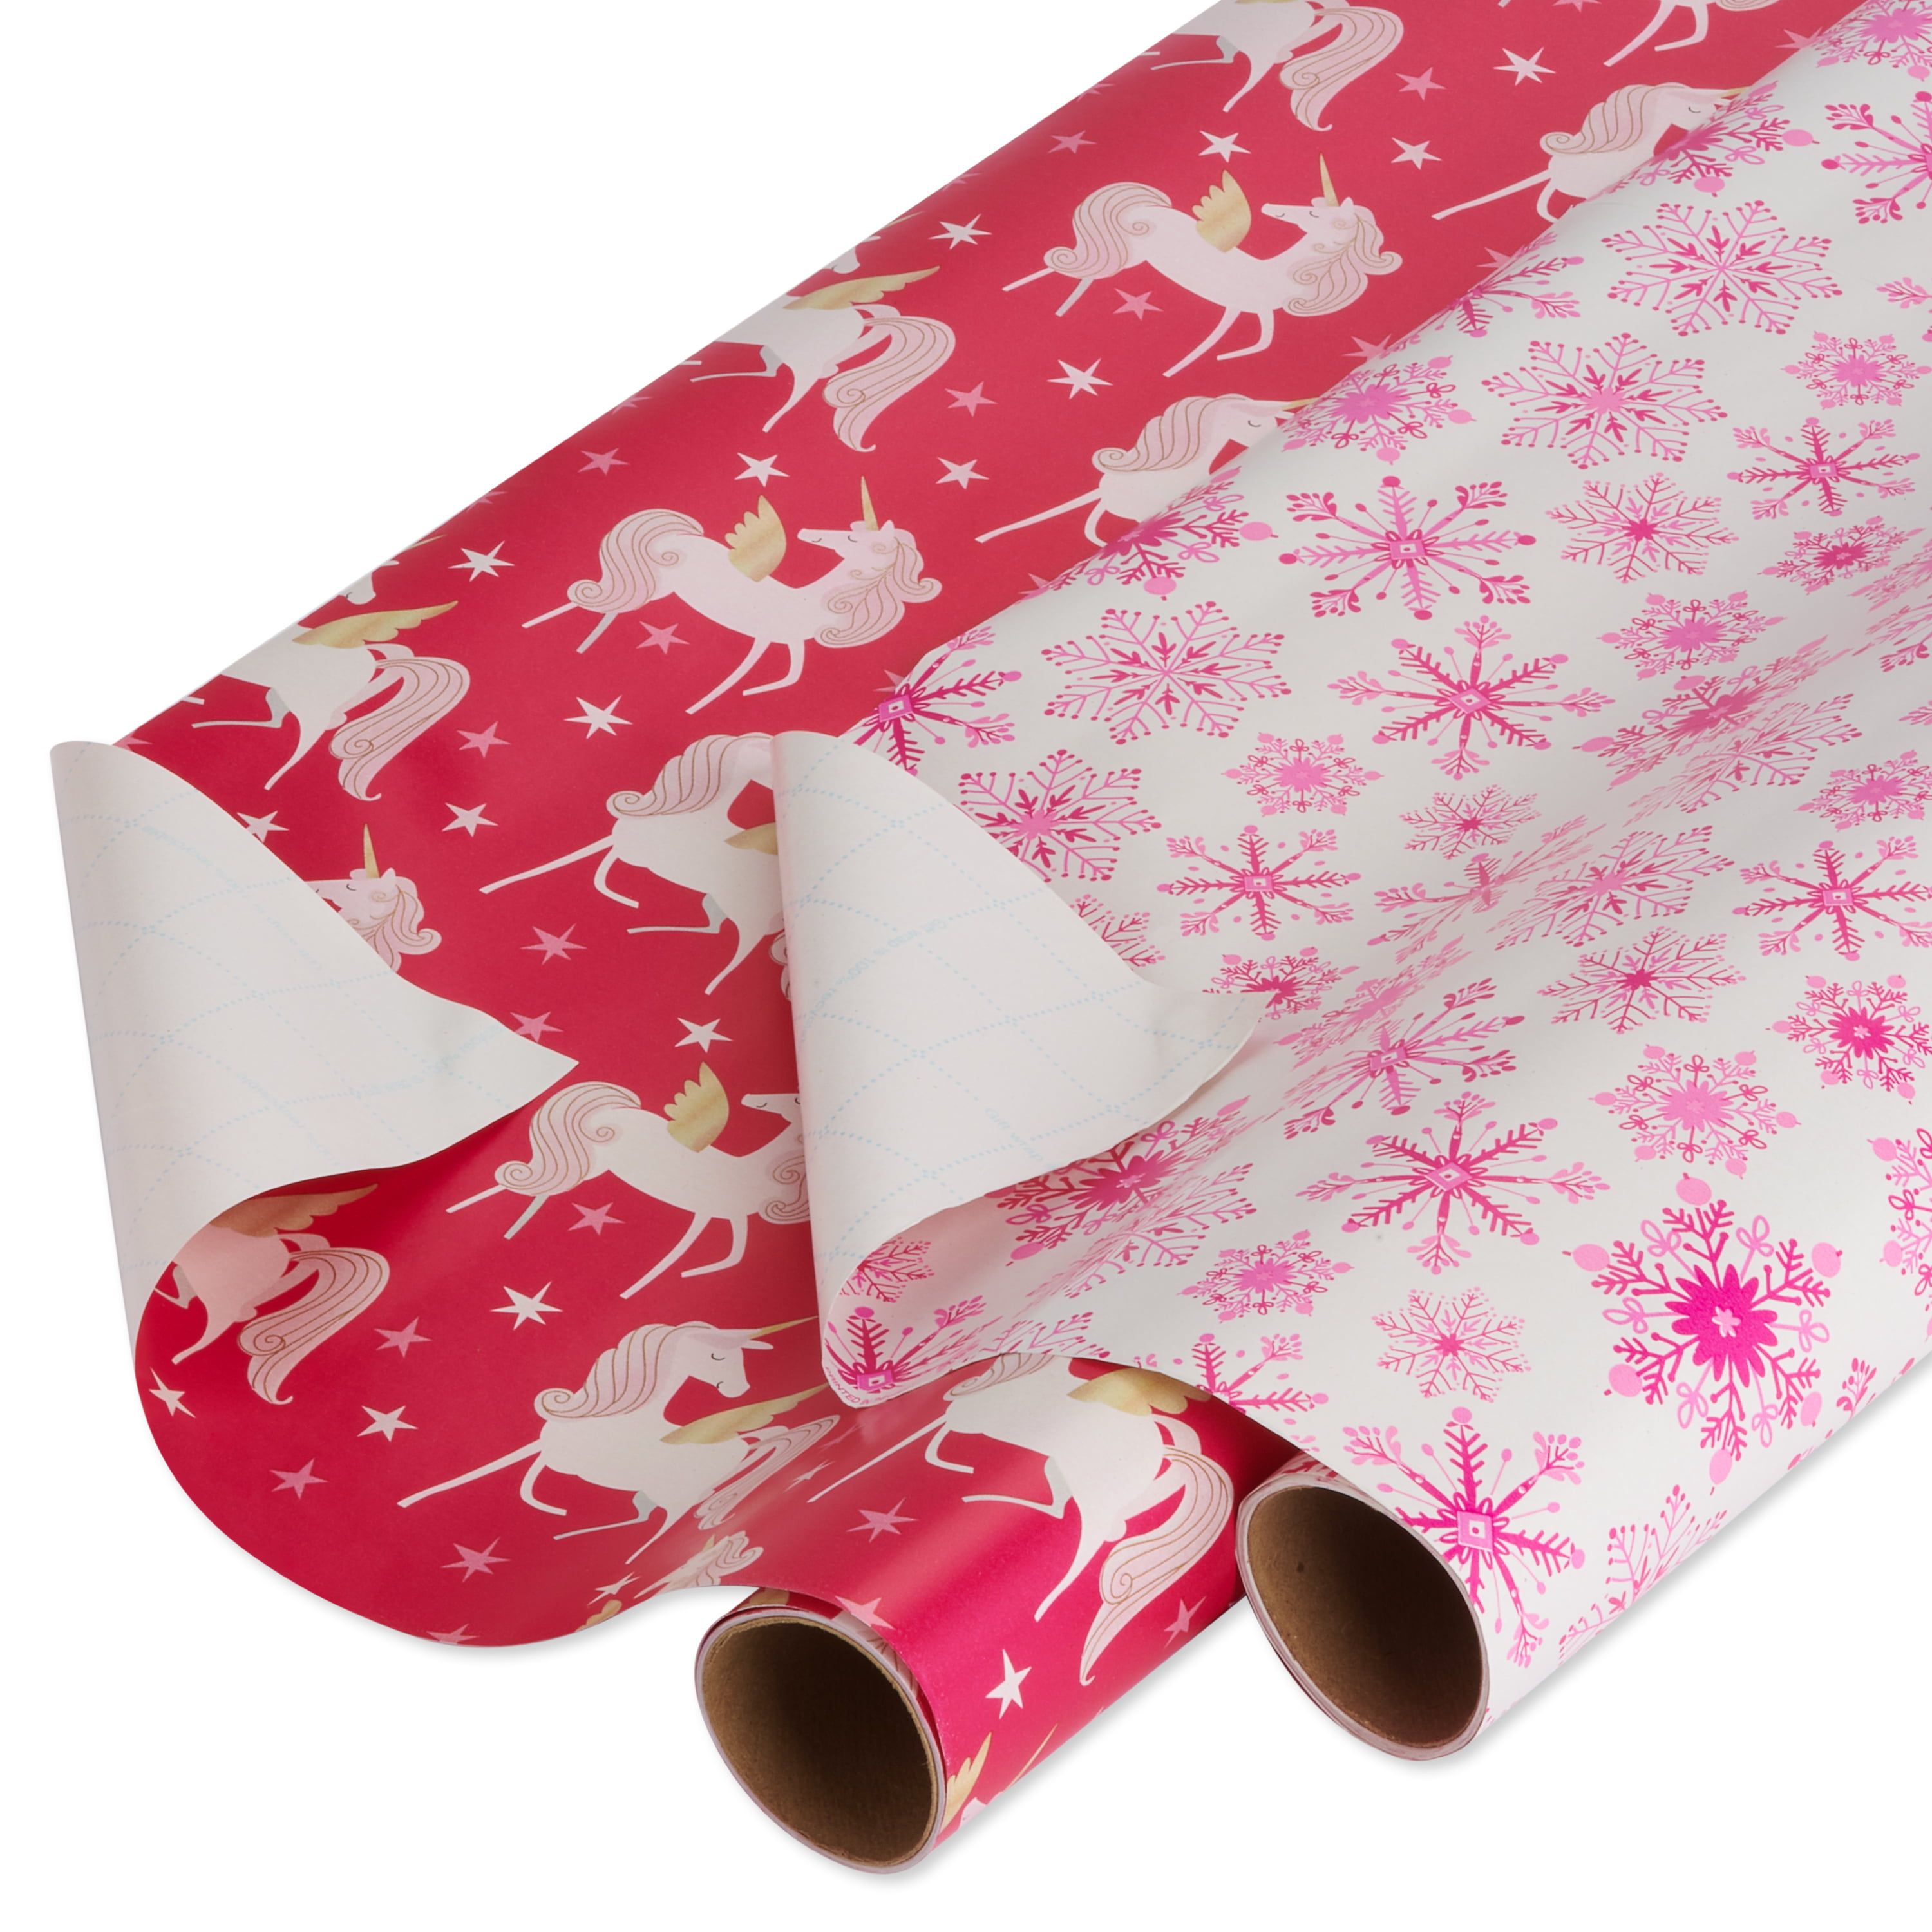 UNICORN Personalised Christmas Wrapping Paper A1 size! 